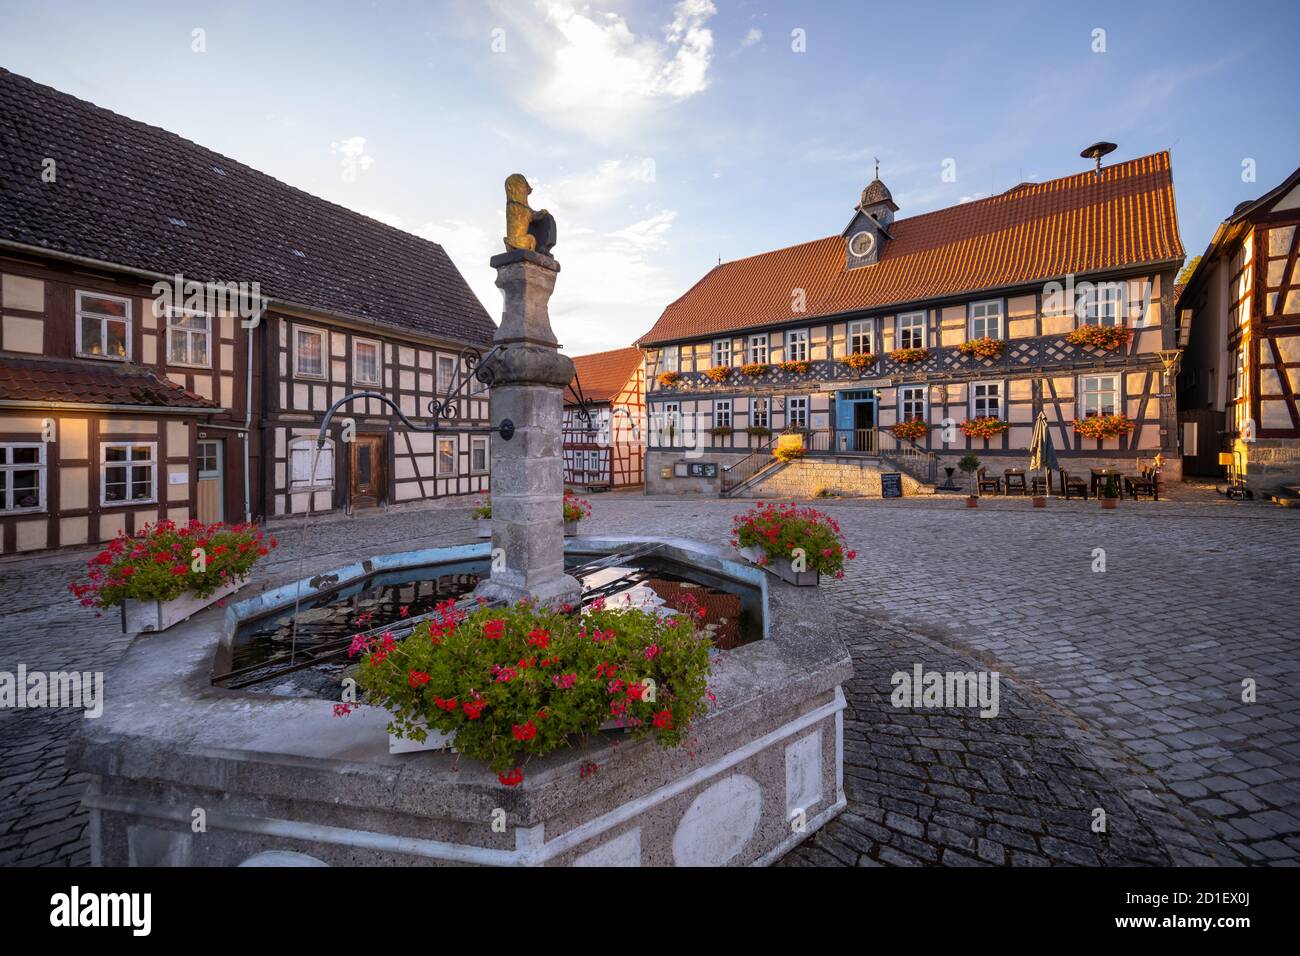 Townhall on marketplace of Ummerstadt, Germany Stock Photo